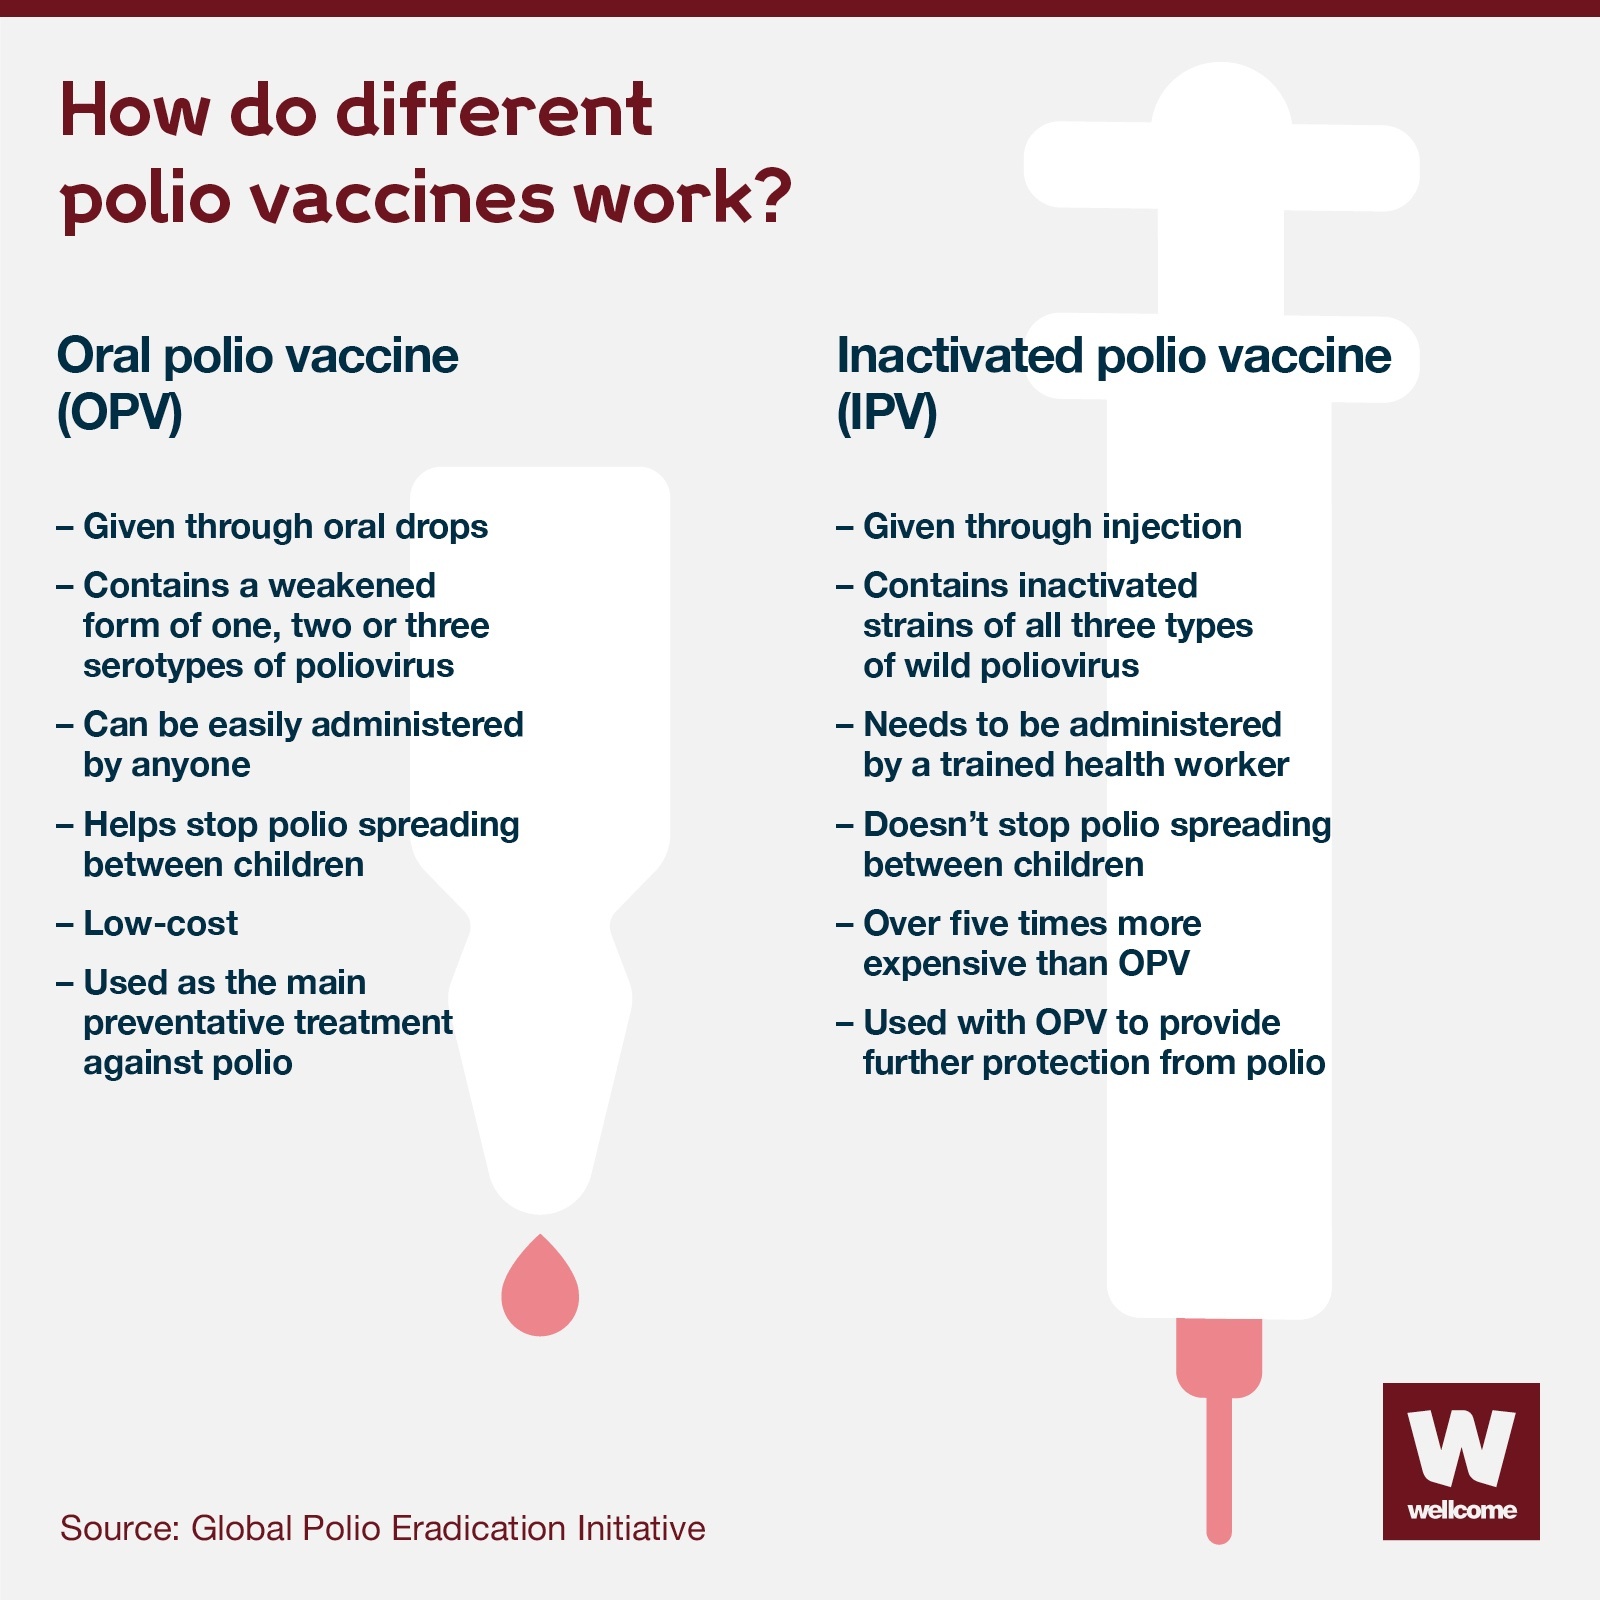 An infographic explaining how different polio vaccines work